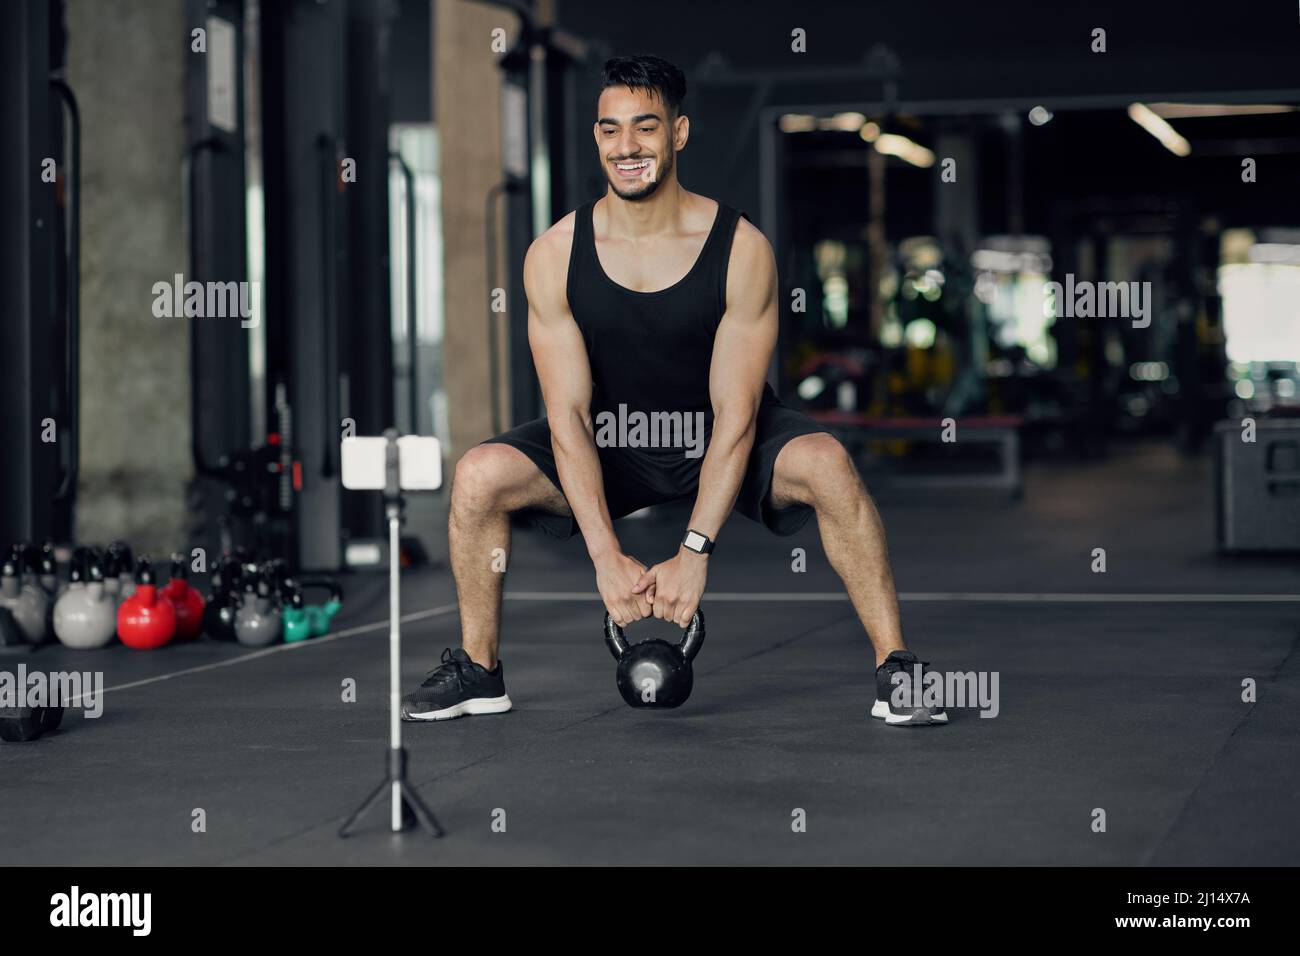 Middle Eastern Male Athlete Capturing Online Workouts At Gym For Fitness Blog Stock Photo